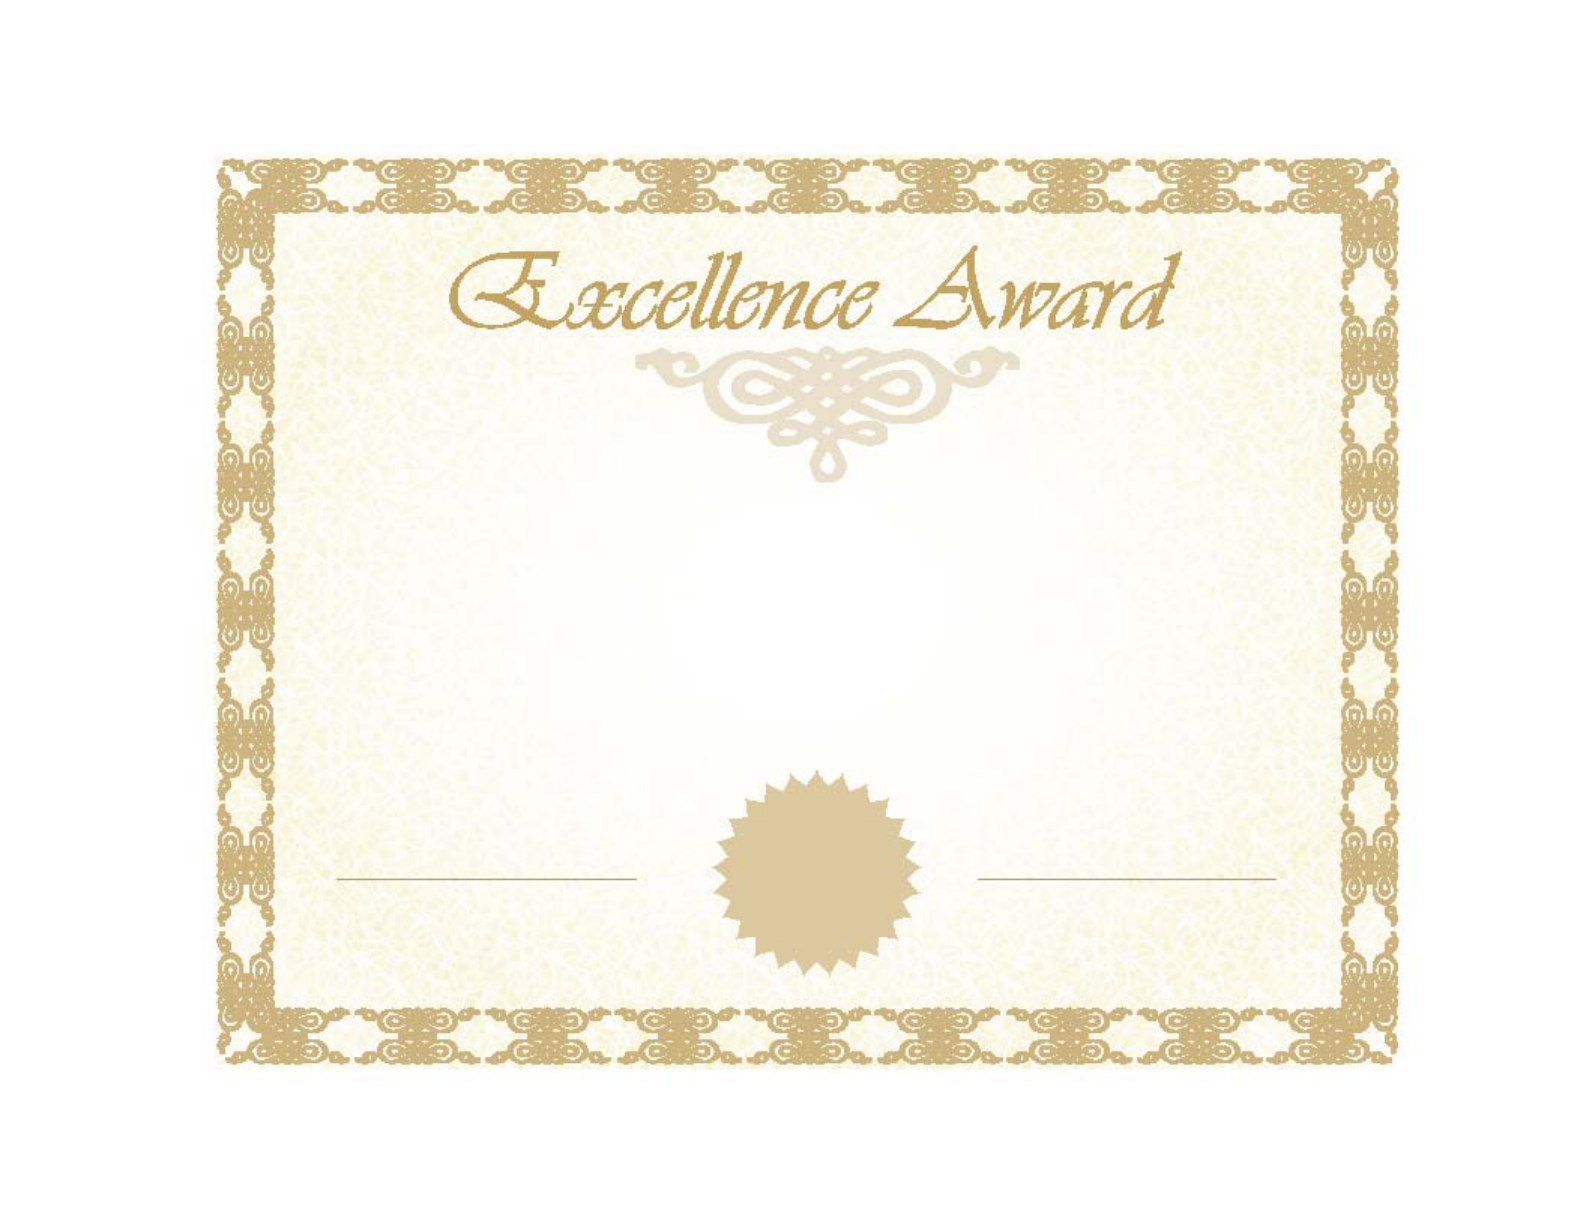 Excellence Award Certificate